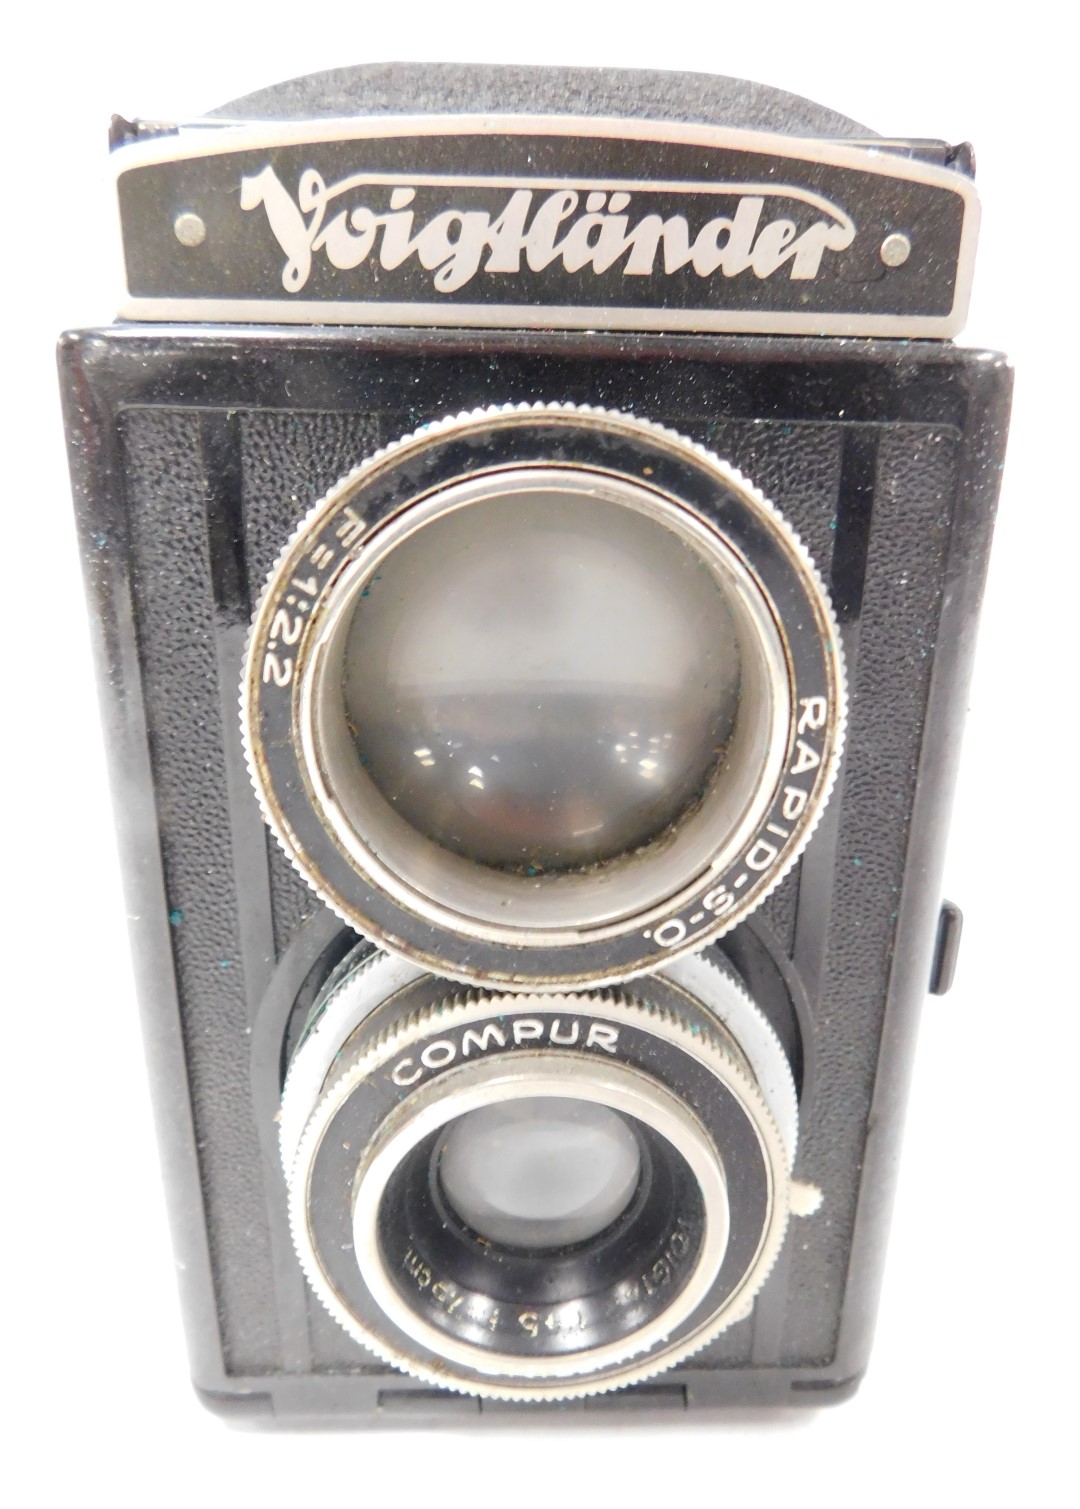 A Voigtlander TLR camera, with Compur Brillant and Rapid-S-O 1:2.2 lenses, cased. - Image 2 of 3